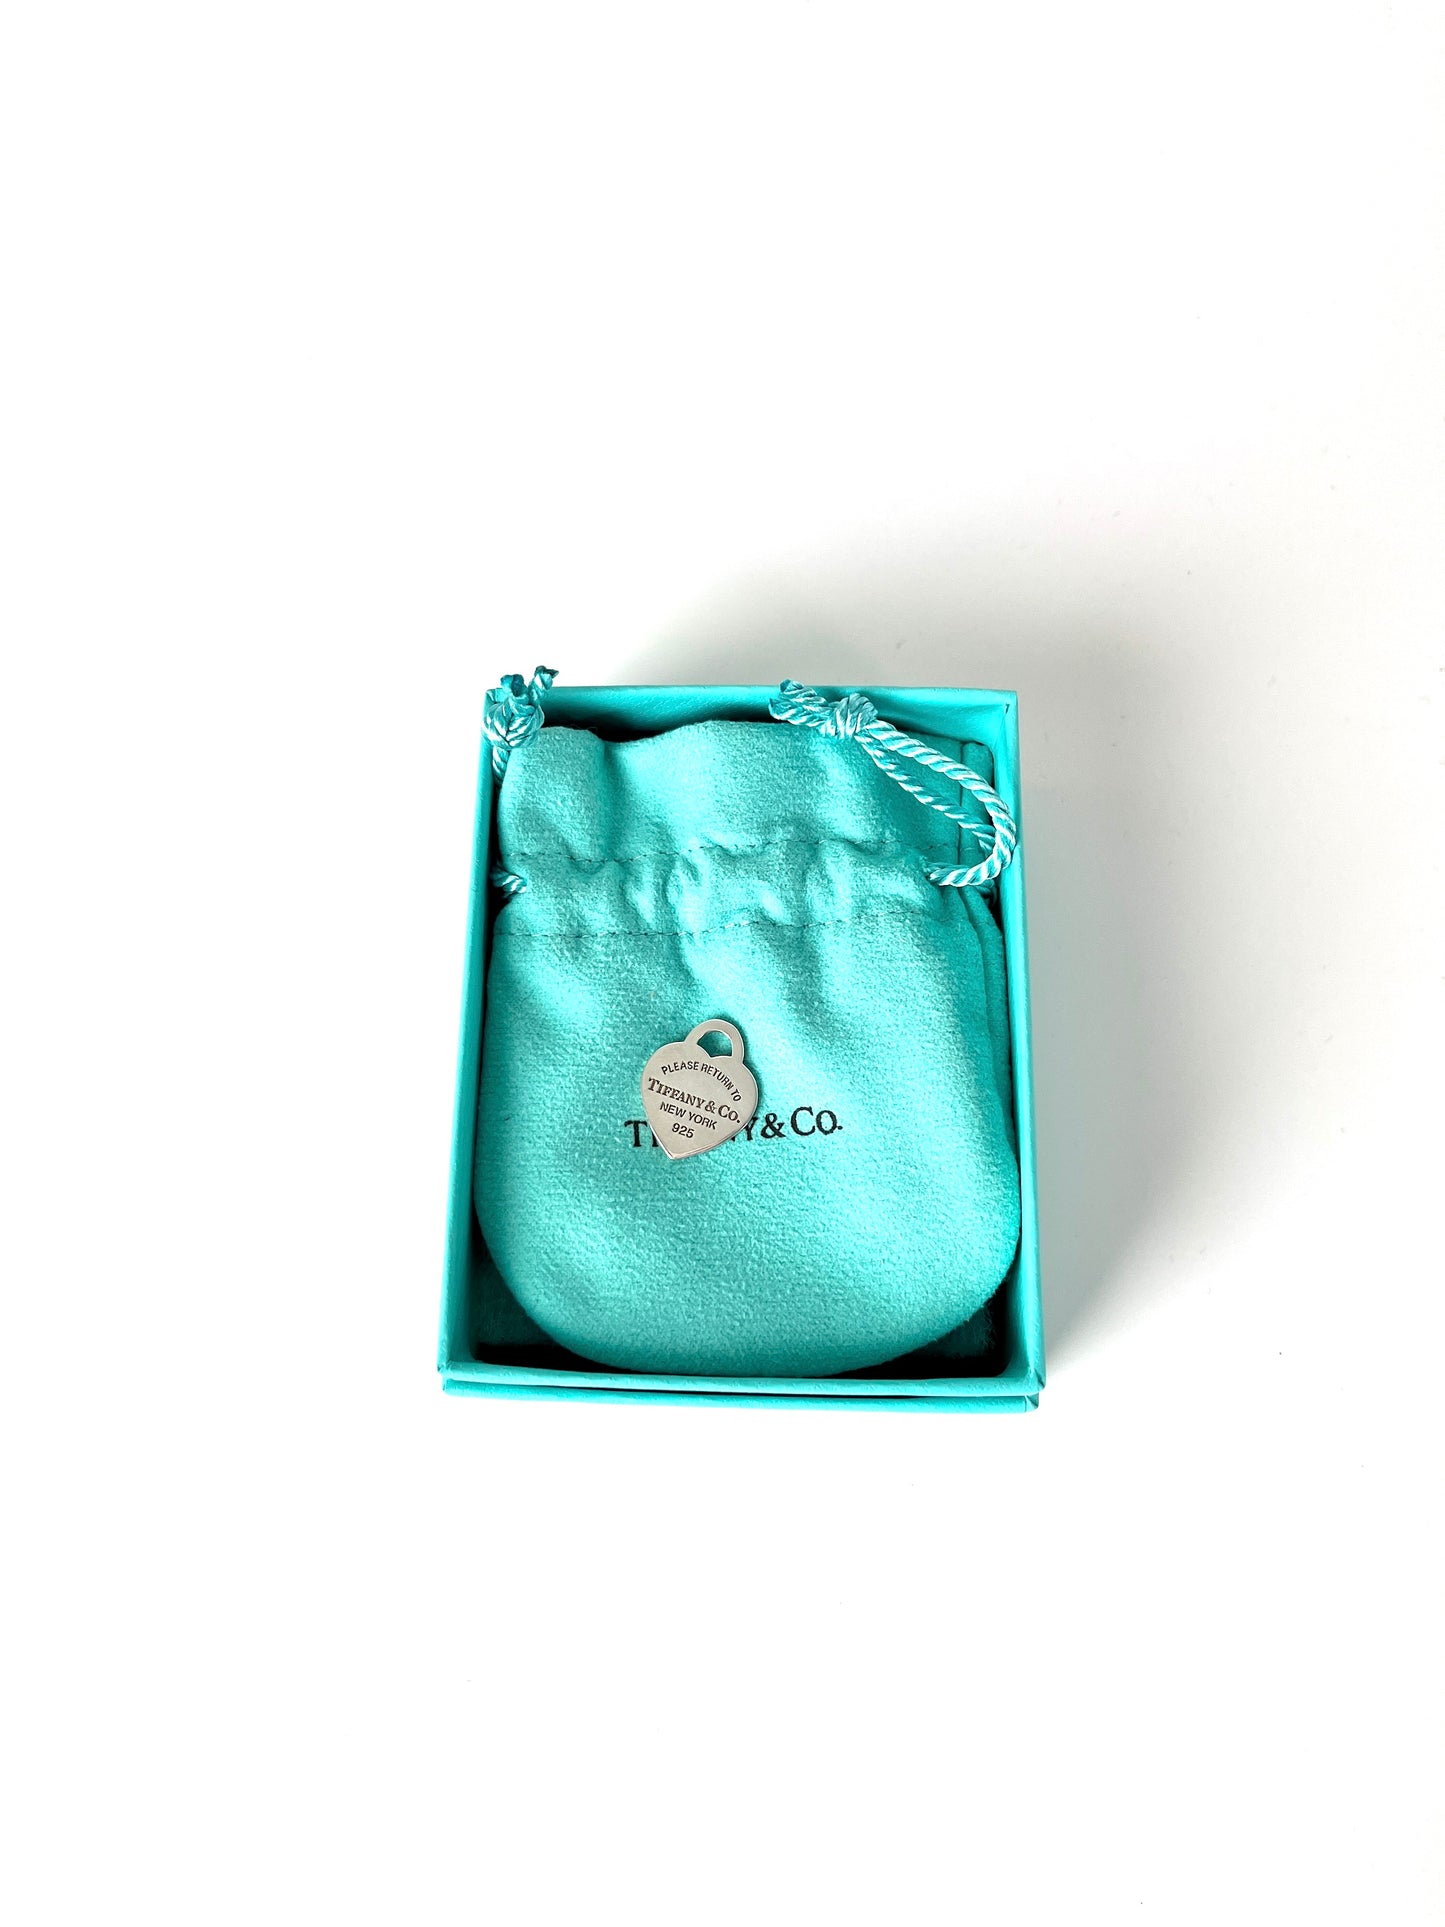 Tiffany & Co Small Sterling Silver Heart Return To Tag Charm Pendant